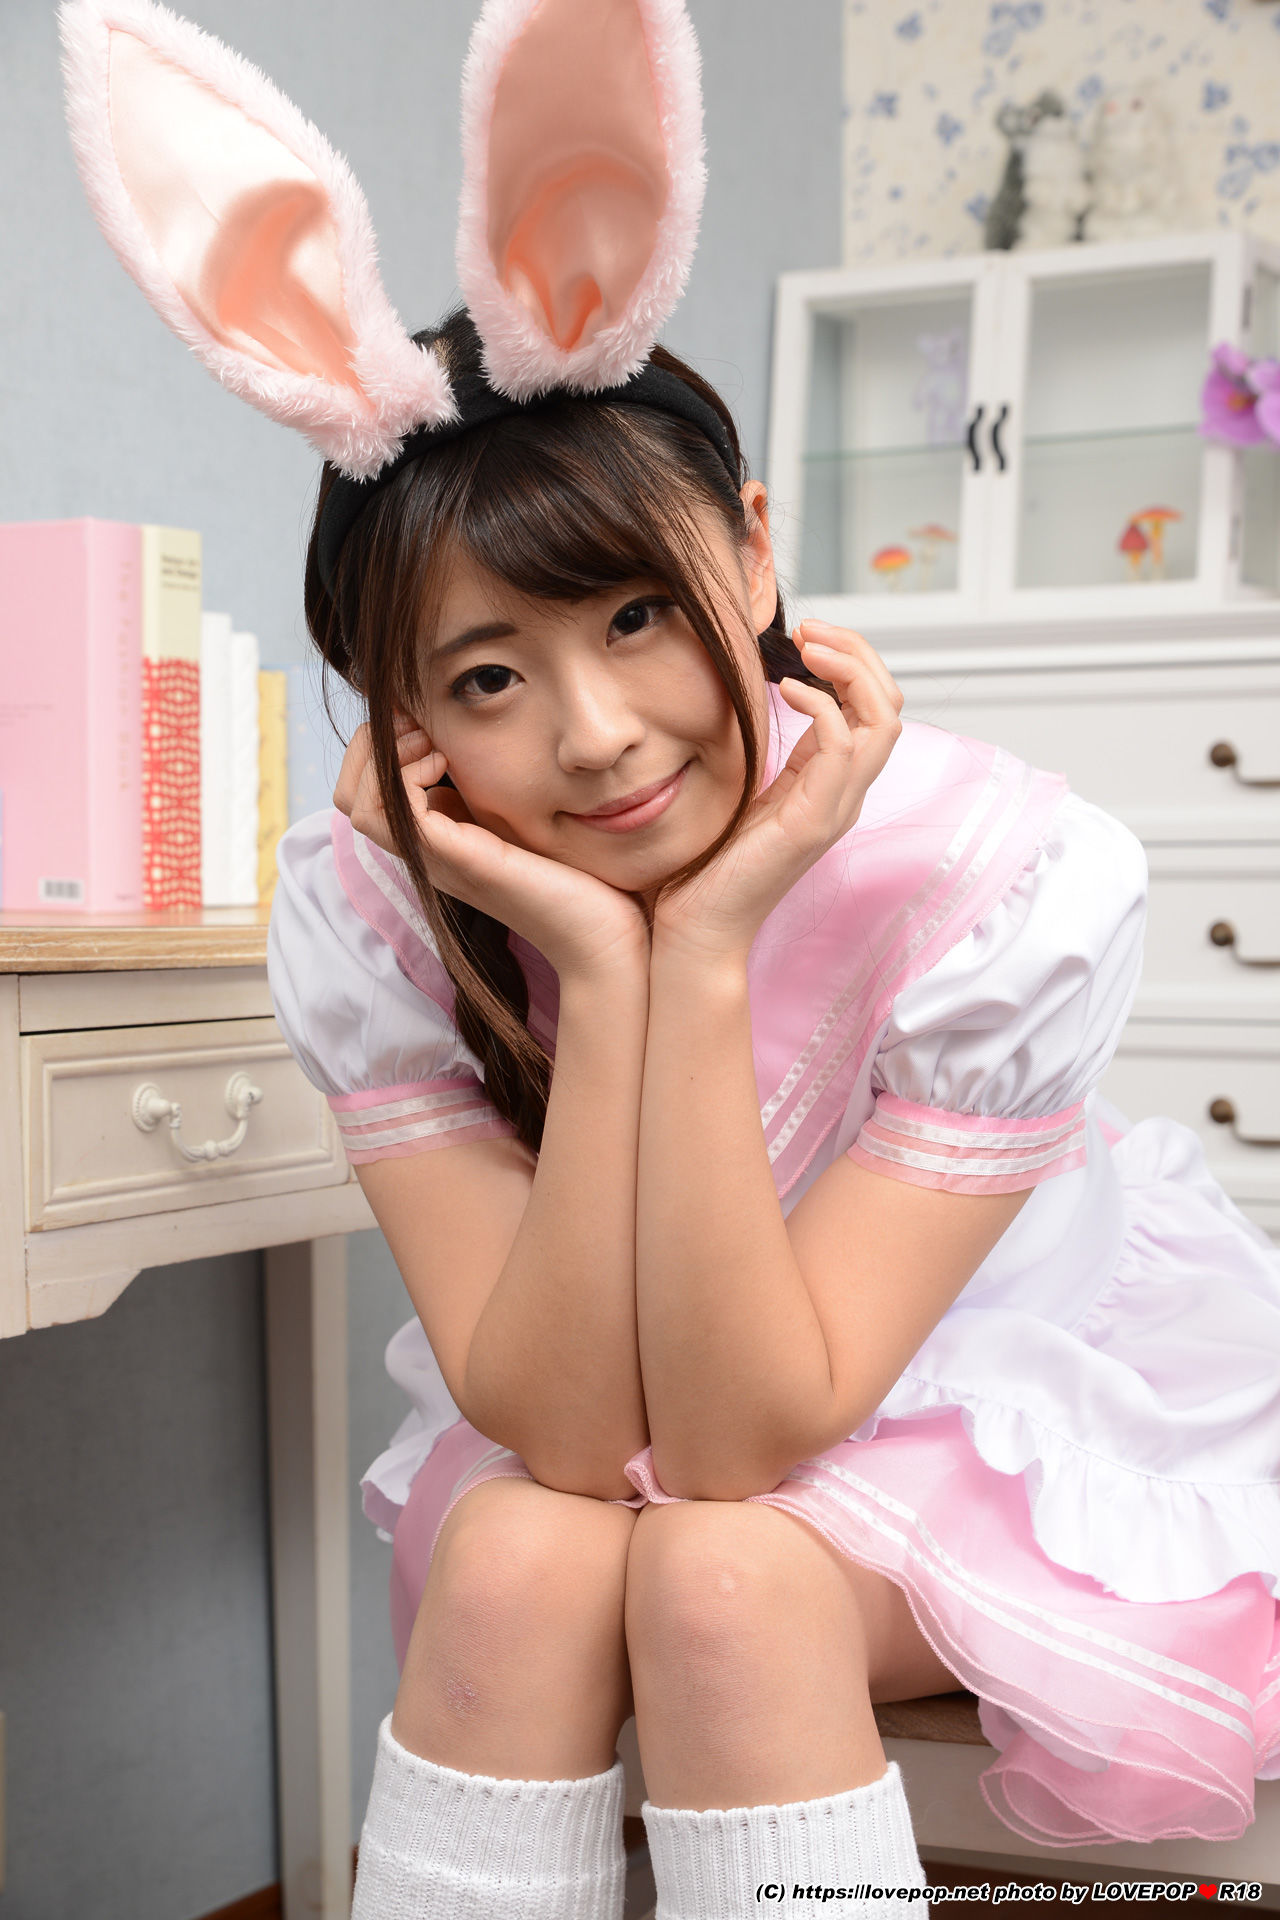 [LOVEPOP] Special Maid Collection - Airi Satou さとう愛理 Photoset 04